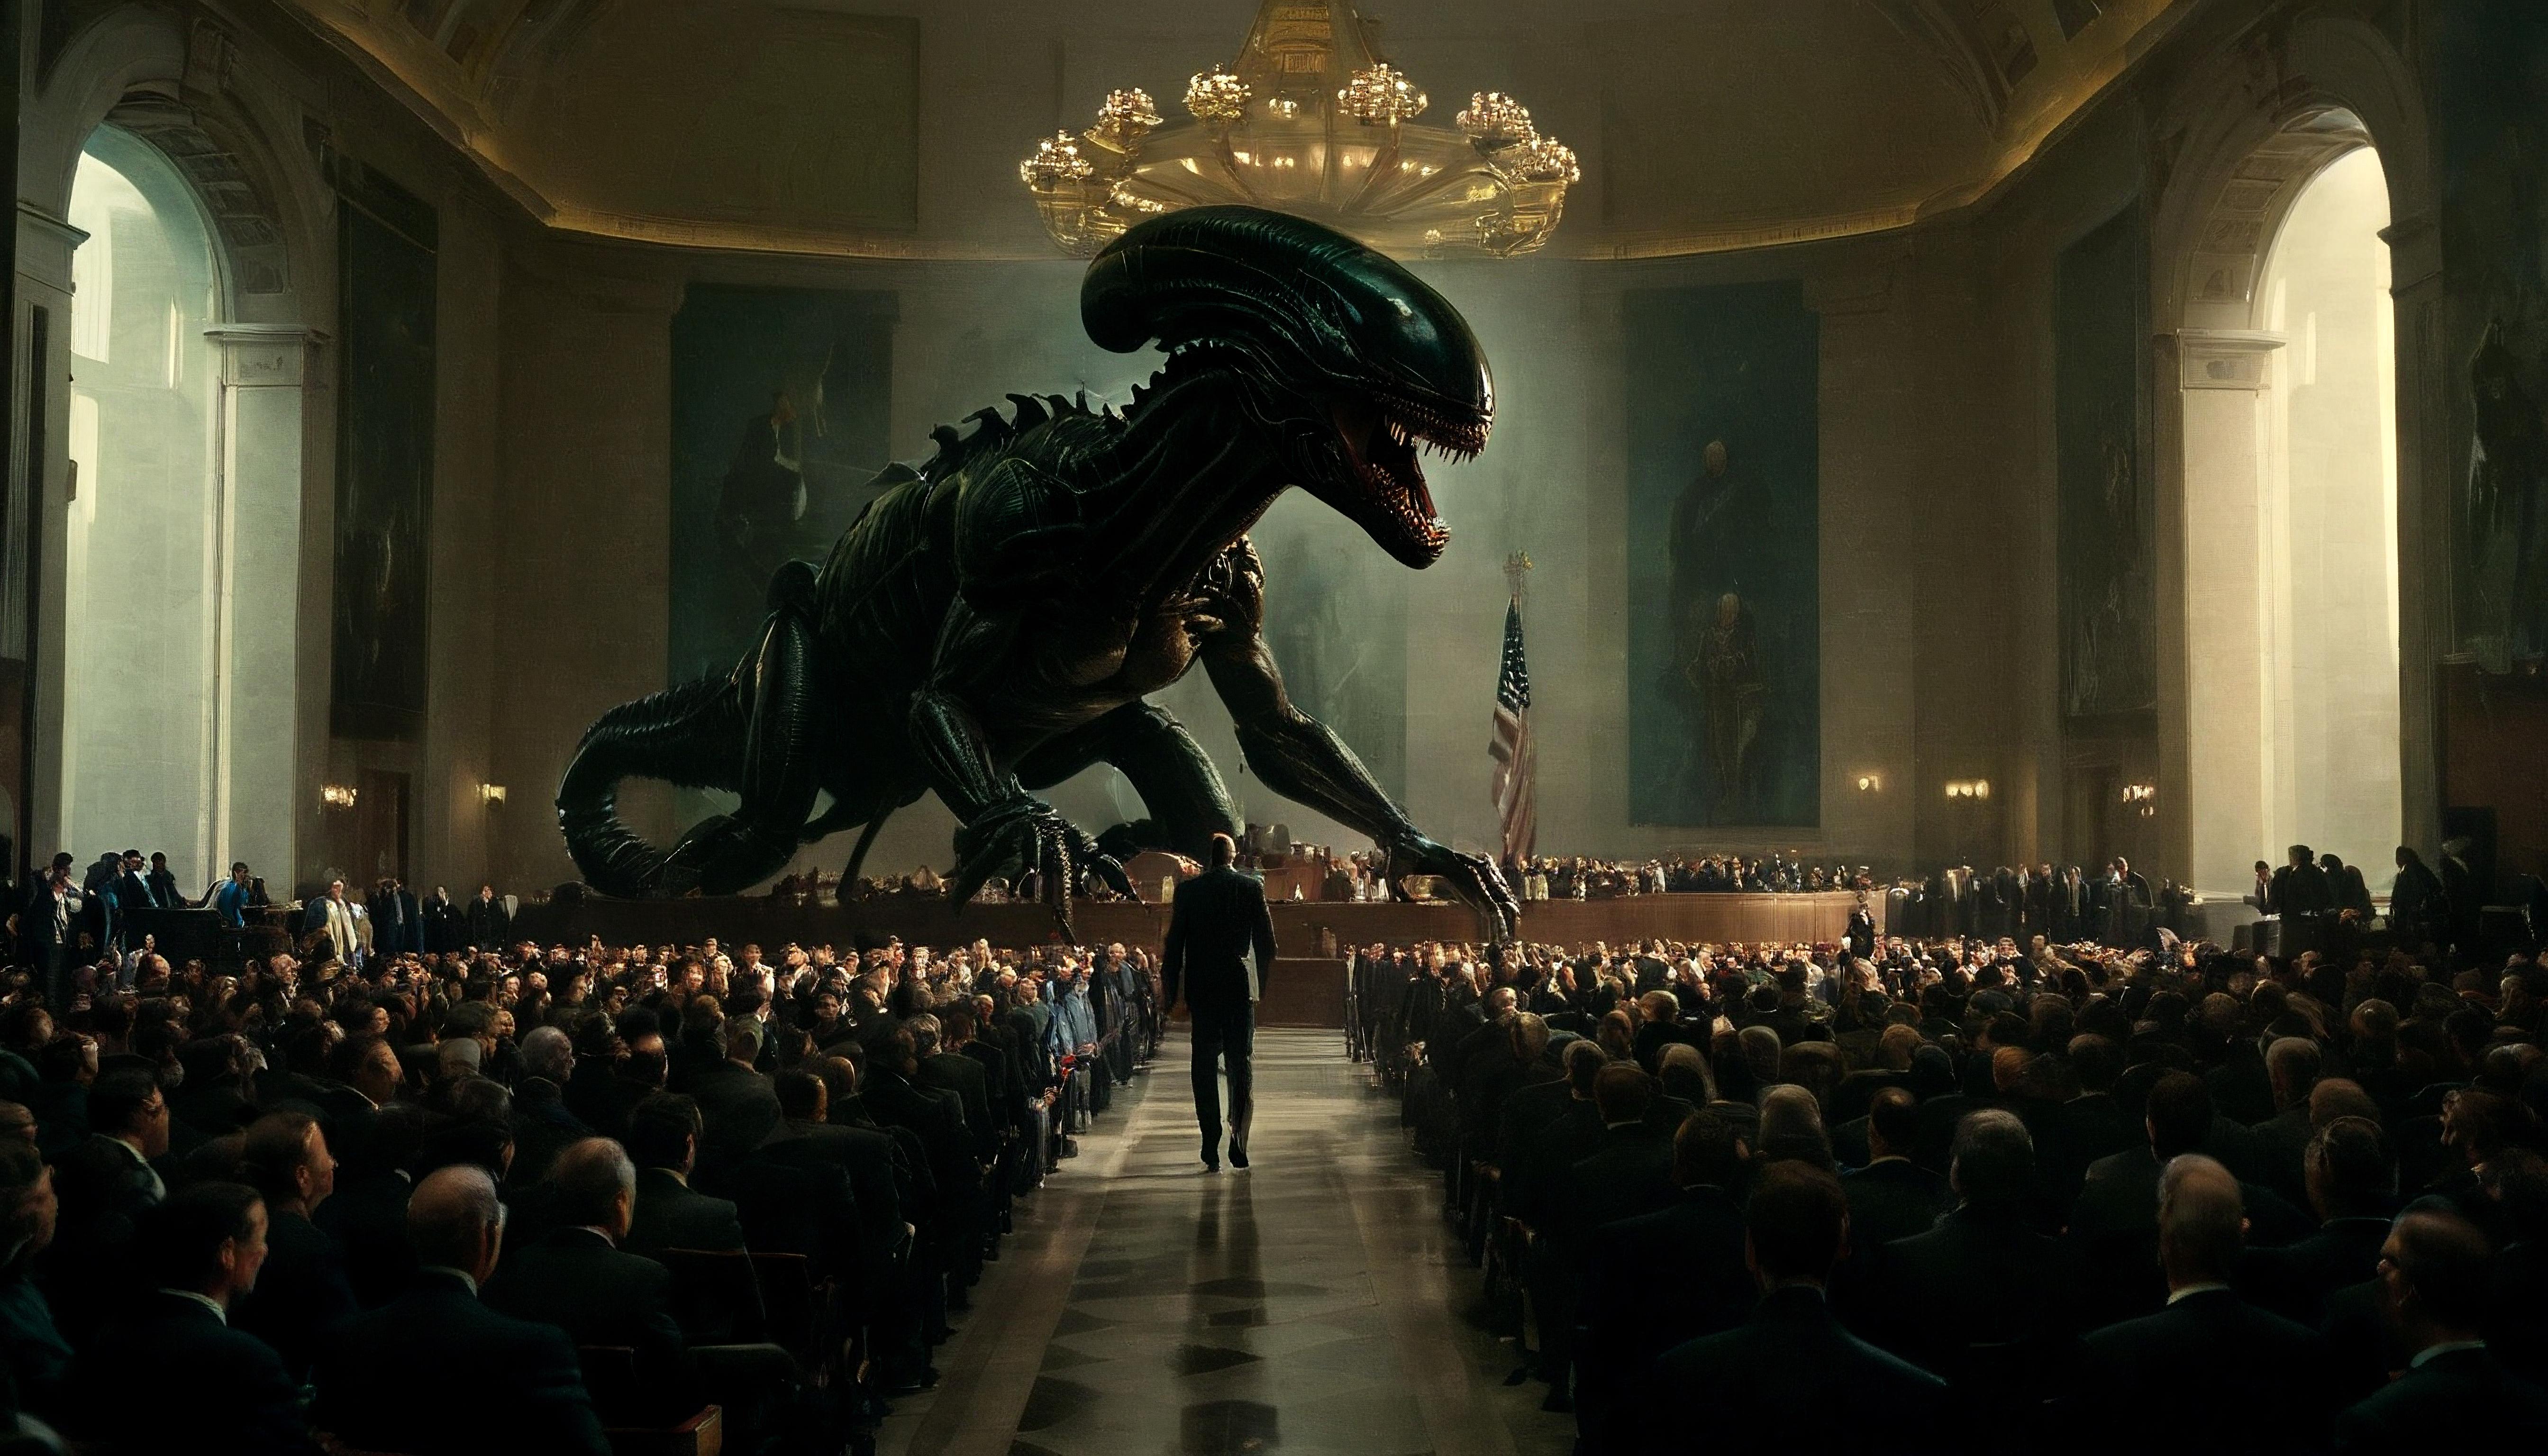 A man standing in front of a massive Alien creature in a room filled with people.